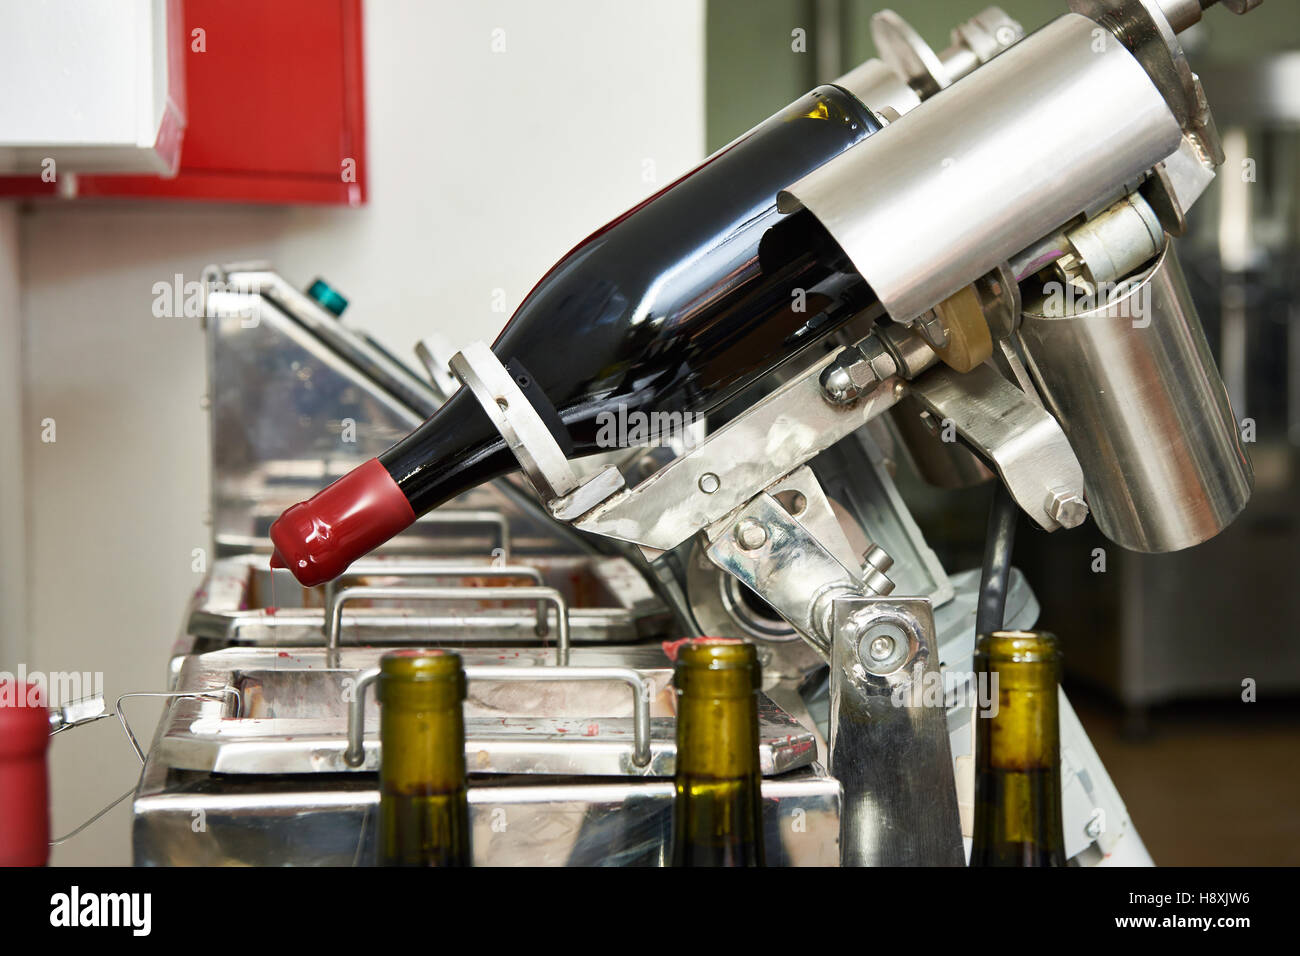 Sealing bottles of wine at the winery Stock Photo